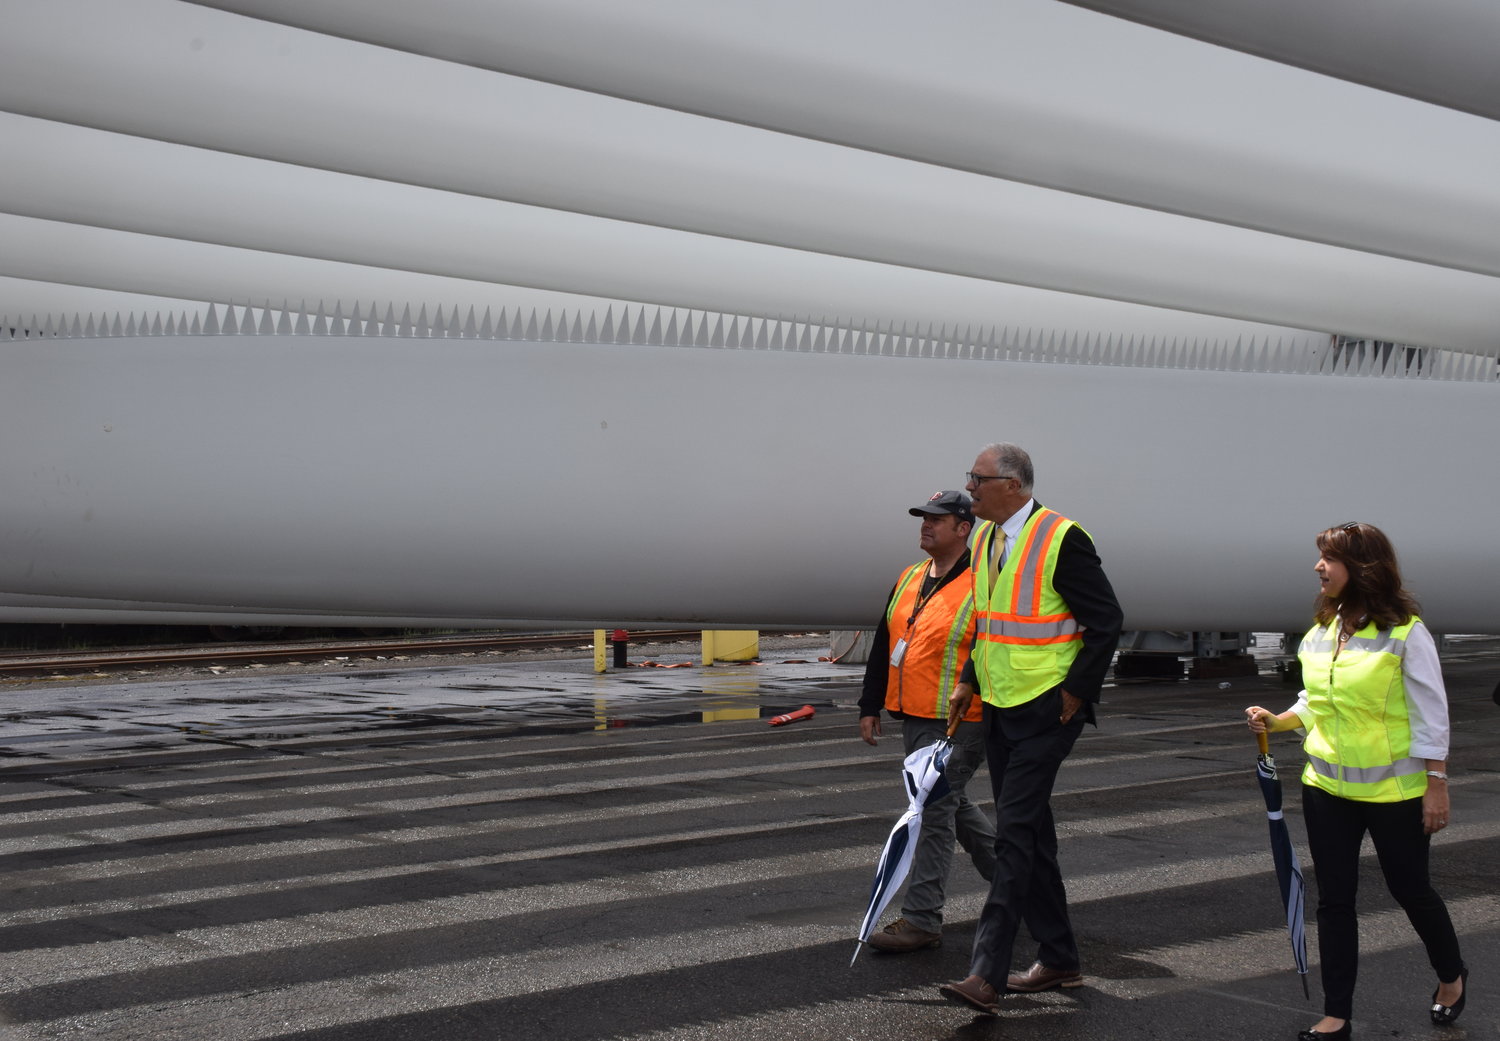 Gov. Jay Inslee, center, tours a Port of Vancouver terminal housing wind turbine blades that will be shipped to an energy project in Wasco, Oregon, alongside ILWU Local 4 President Cager Clabaugh and Port of Vancouver CEO Julianna Marler on June 15. 